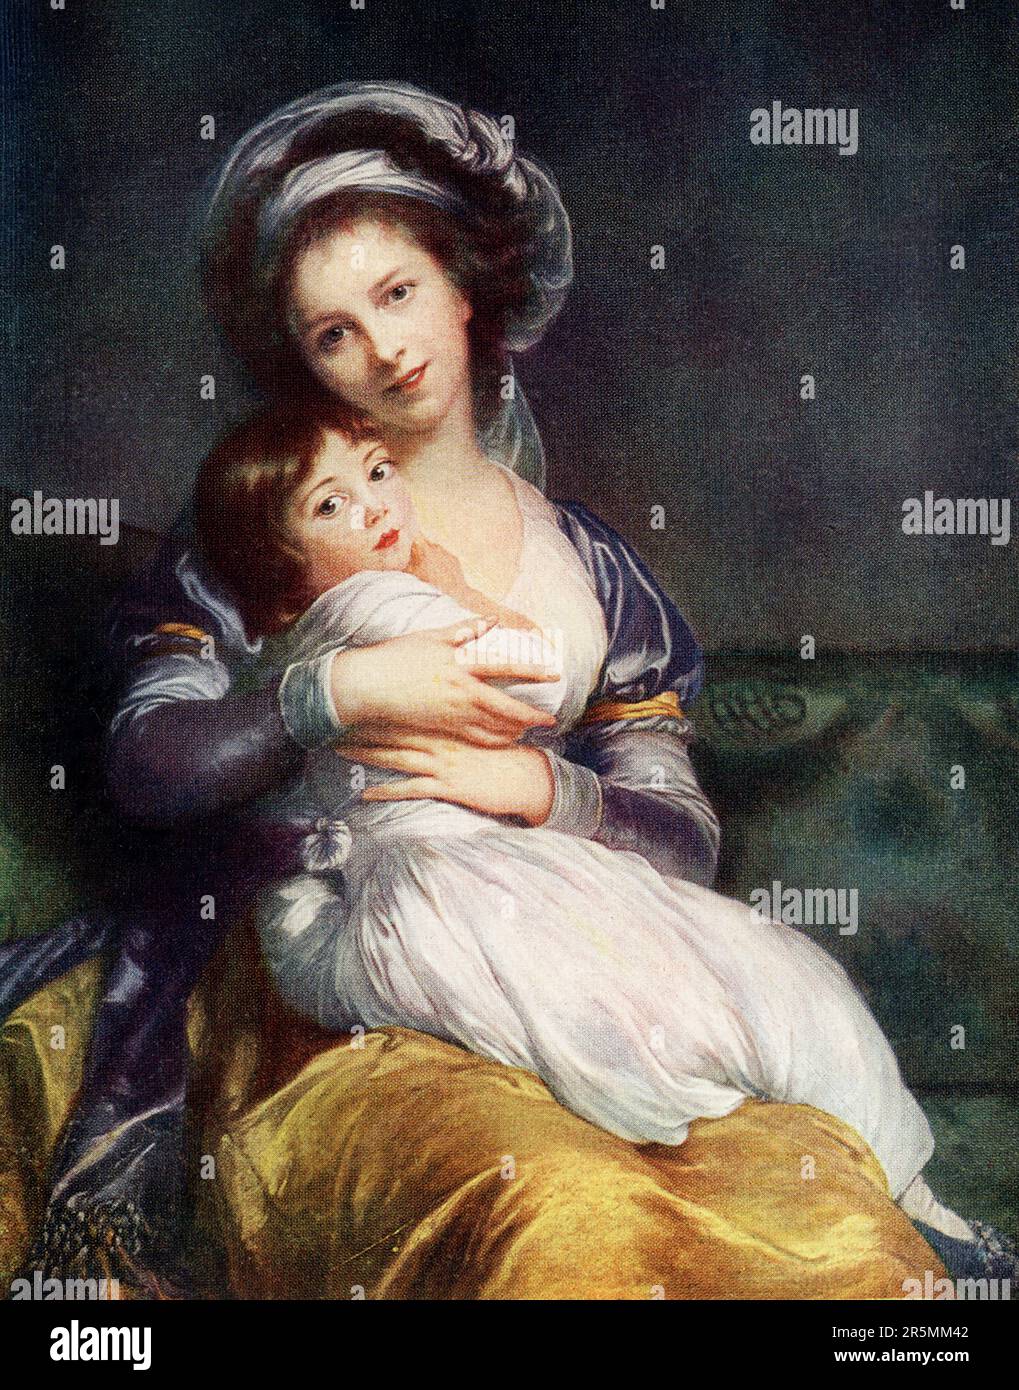 The early 1900s caption reads: 'Madame Vigee Le Brun and Child. Vigee Le brun painted another portrait of herself and her little girl-child; and she painted both, fortunately for her fame, when her skill was its increase. They stand out with all their limitations, pure and exquisite as the Madonna and Child of Italy’s finest achievement; for they were painted by a woman of genius with the passionate love of a child that is the wondrous heritage of woman - none the less religious in that it apes no show of religion.' Elisabeth Louise Vigee Le Brun (1755-1842), also known as Madame Le Brun, was Stock Photo